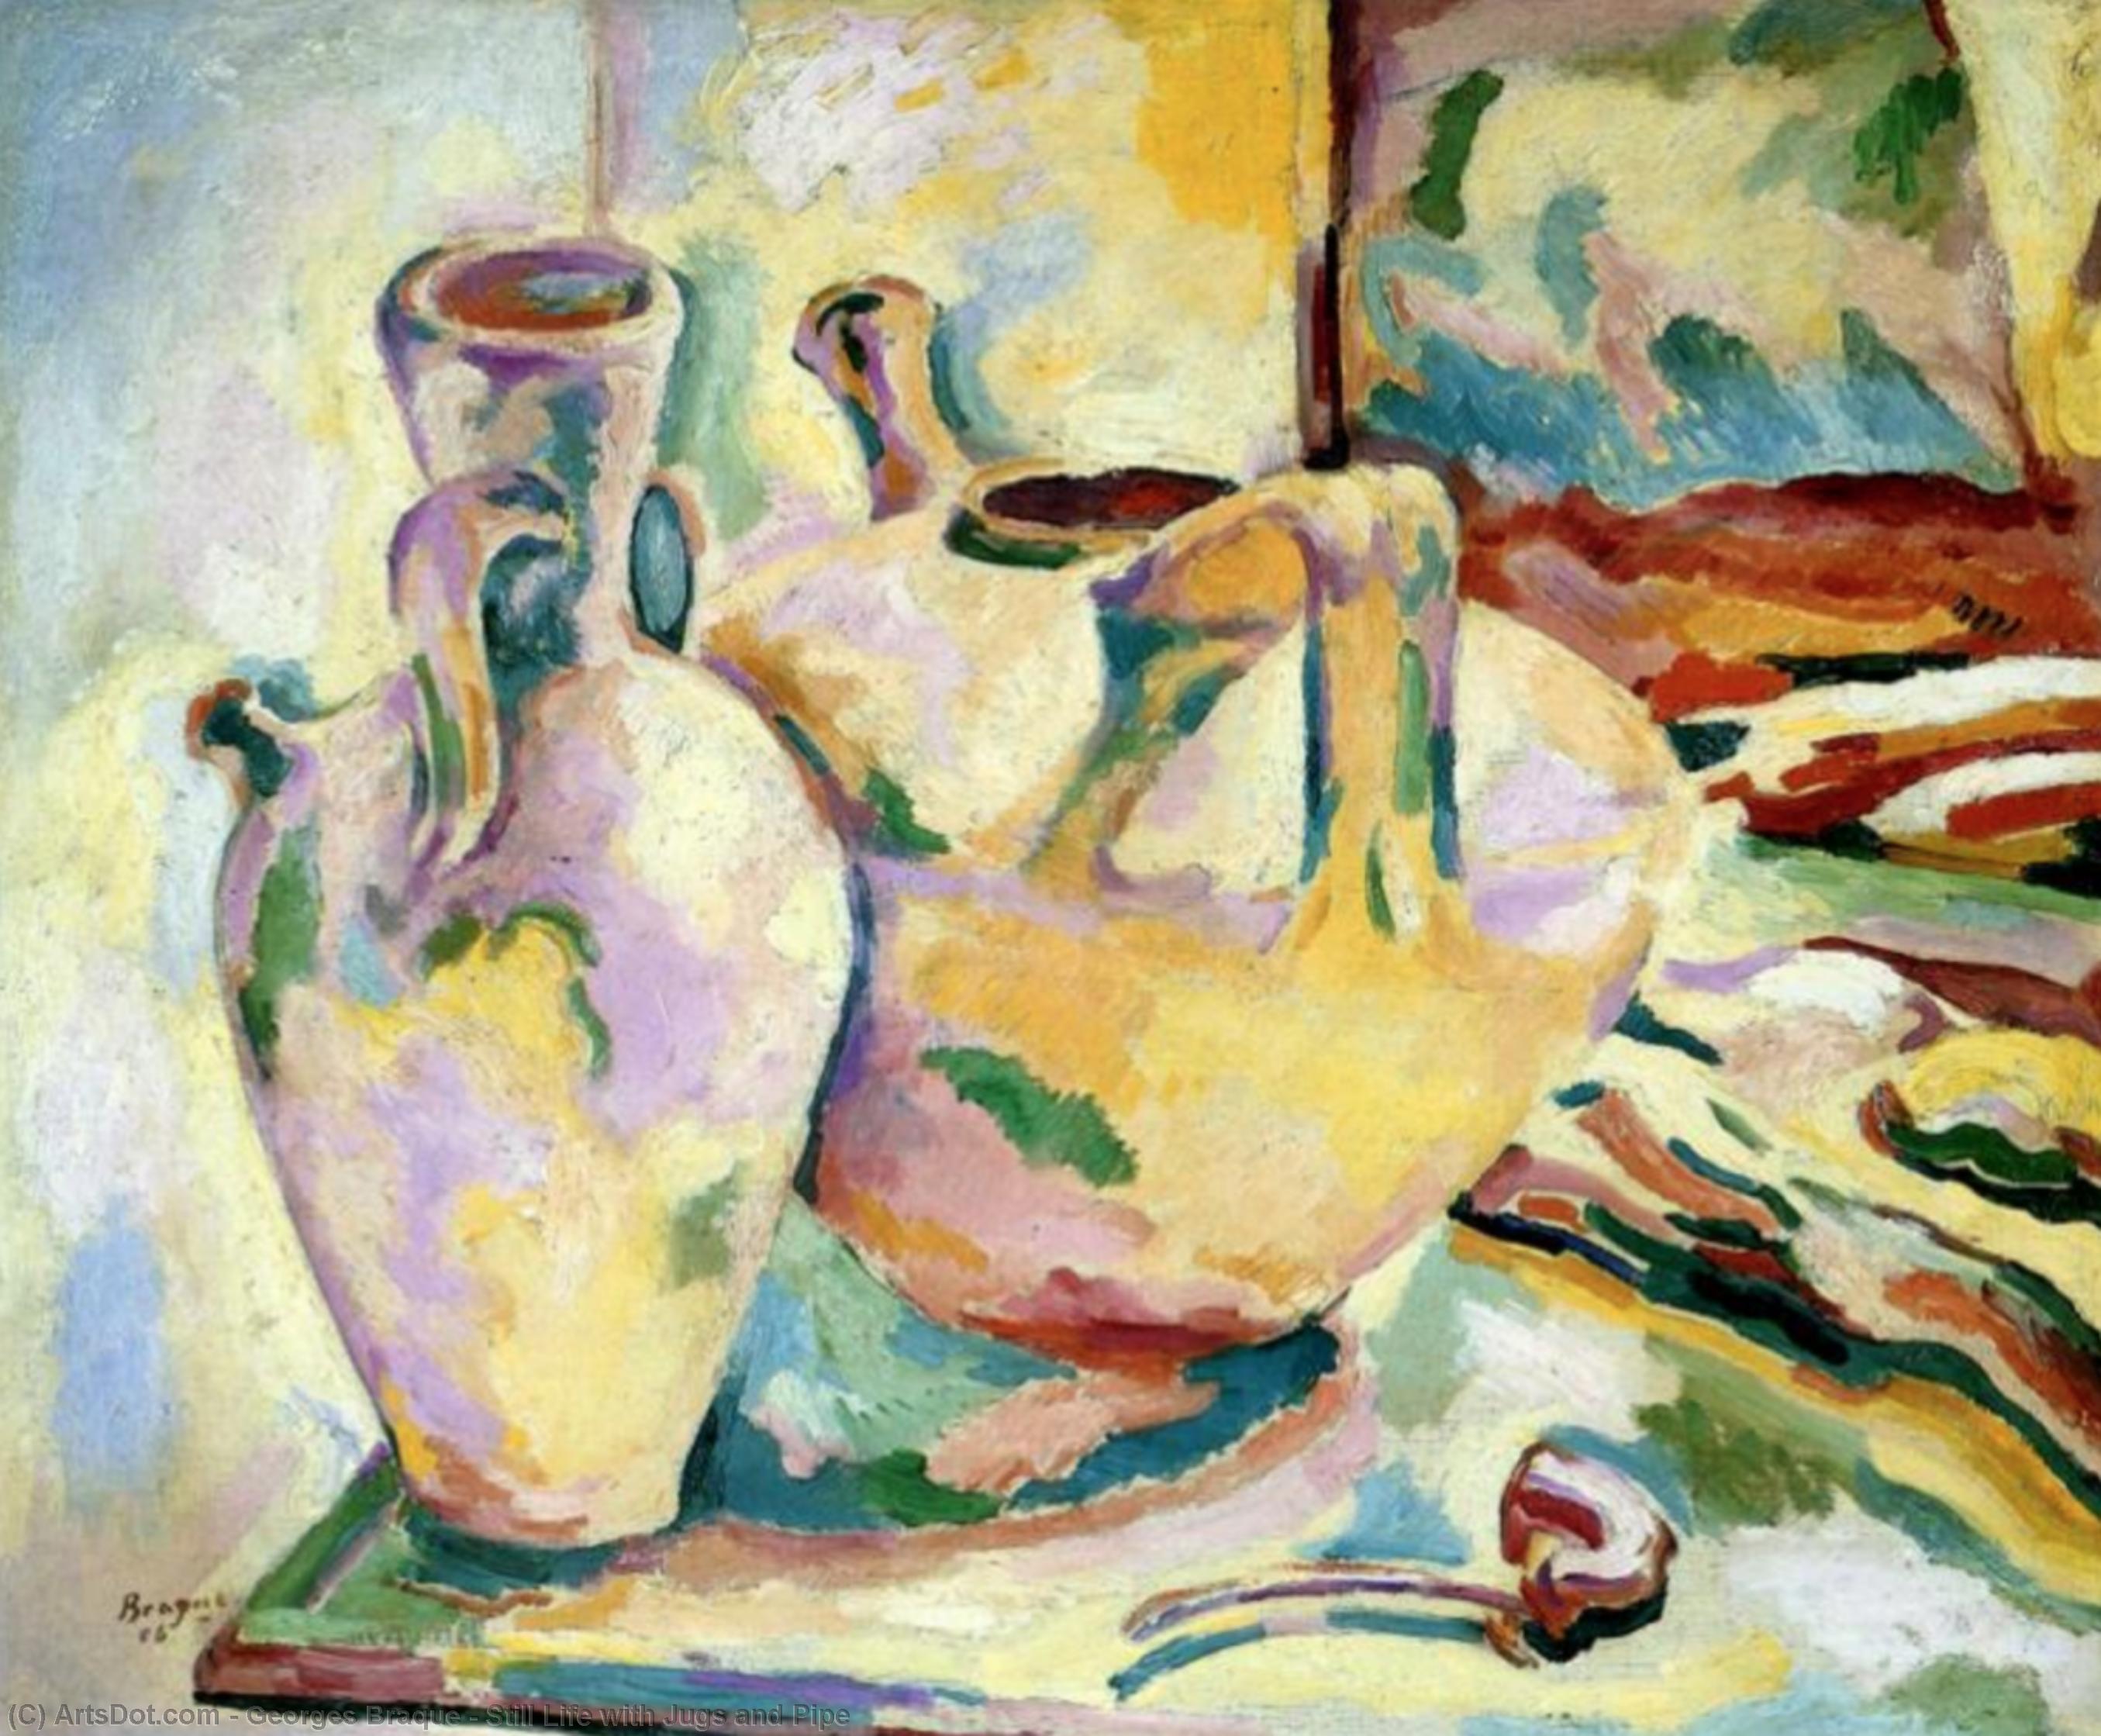 WikiOO.org - 백과 사전 - 회화, 삽화 Georges Braque - Still Life with Jugs and Pipe